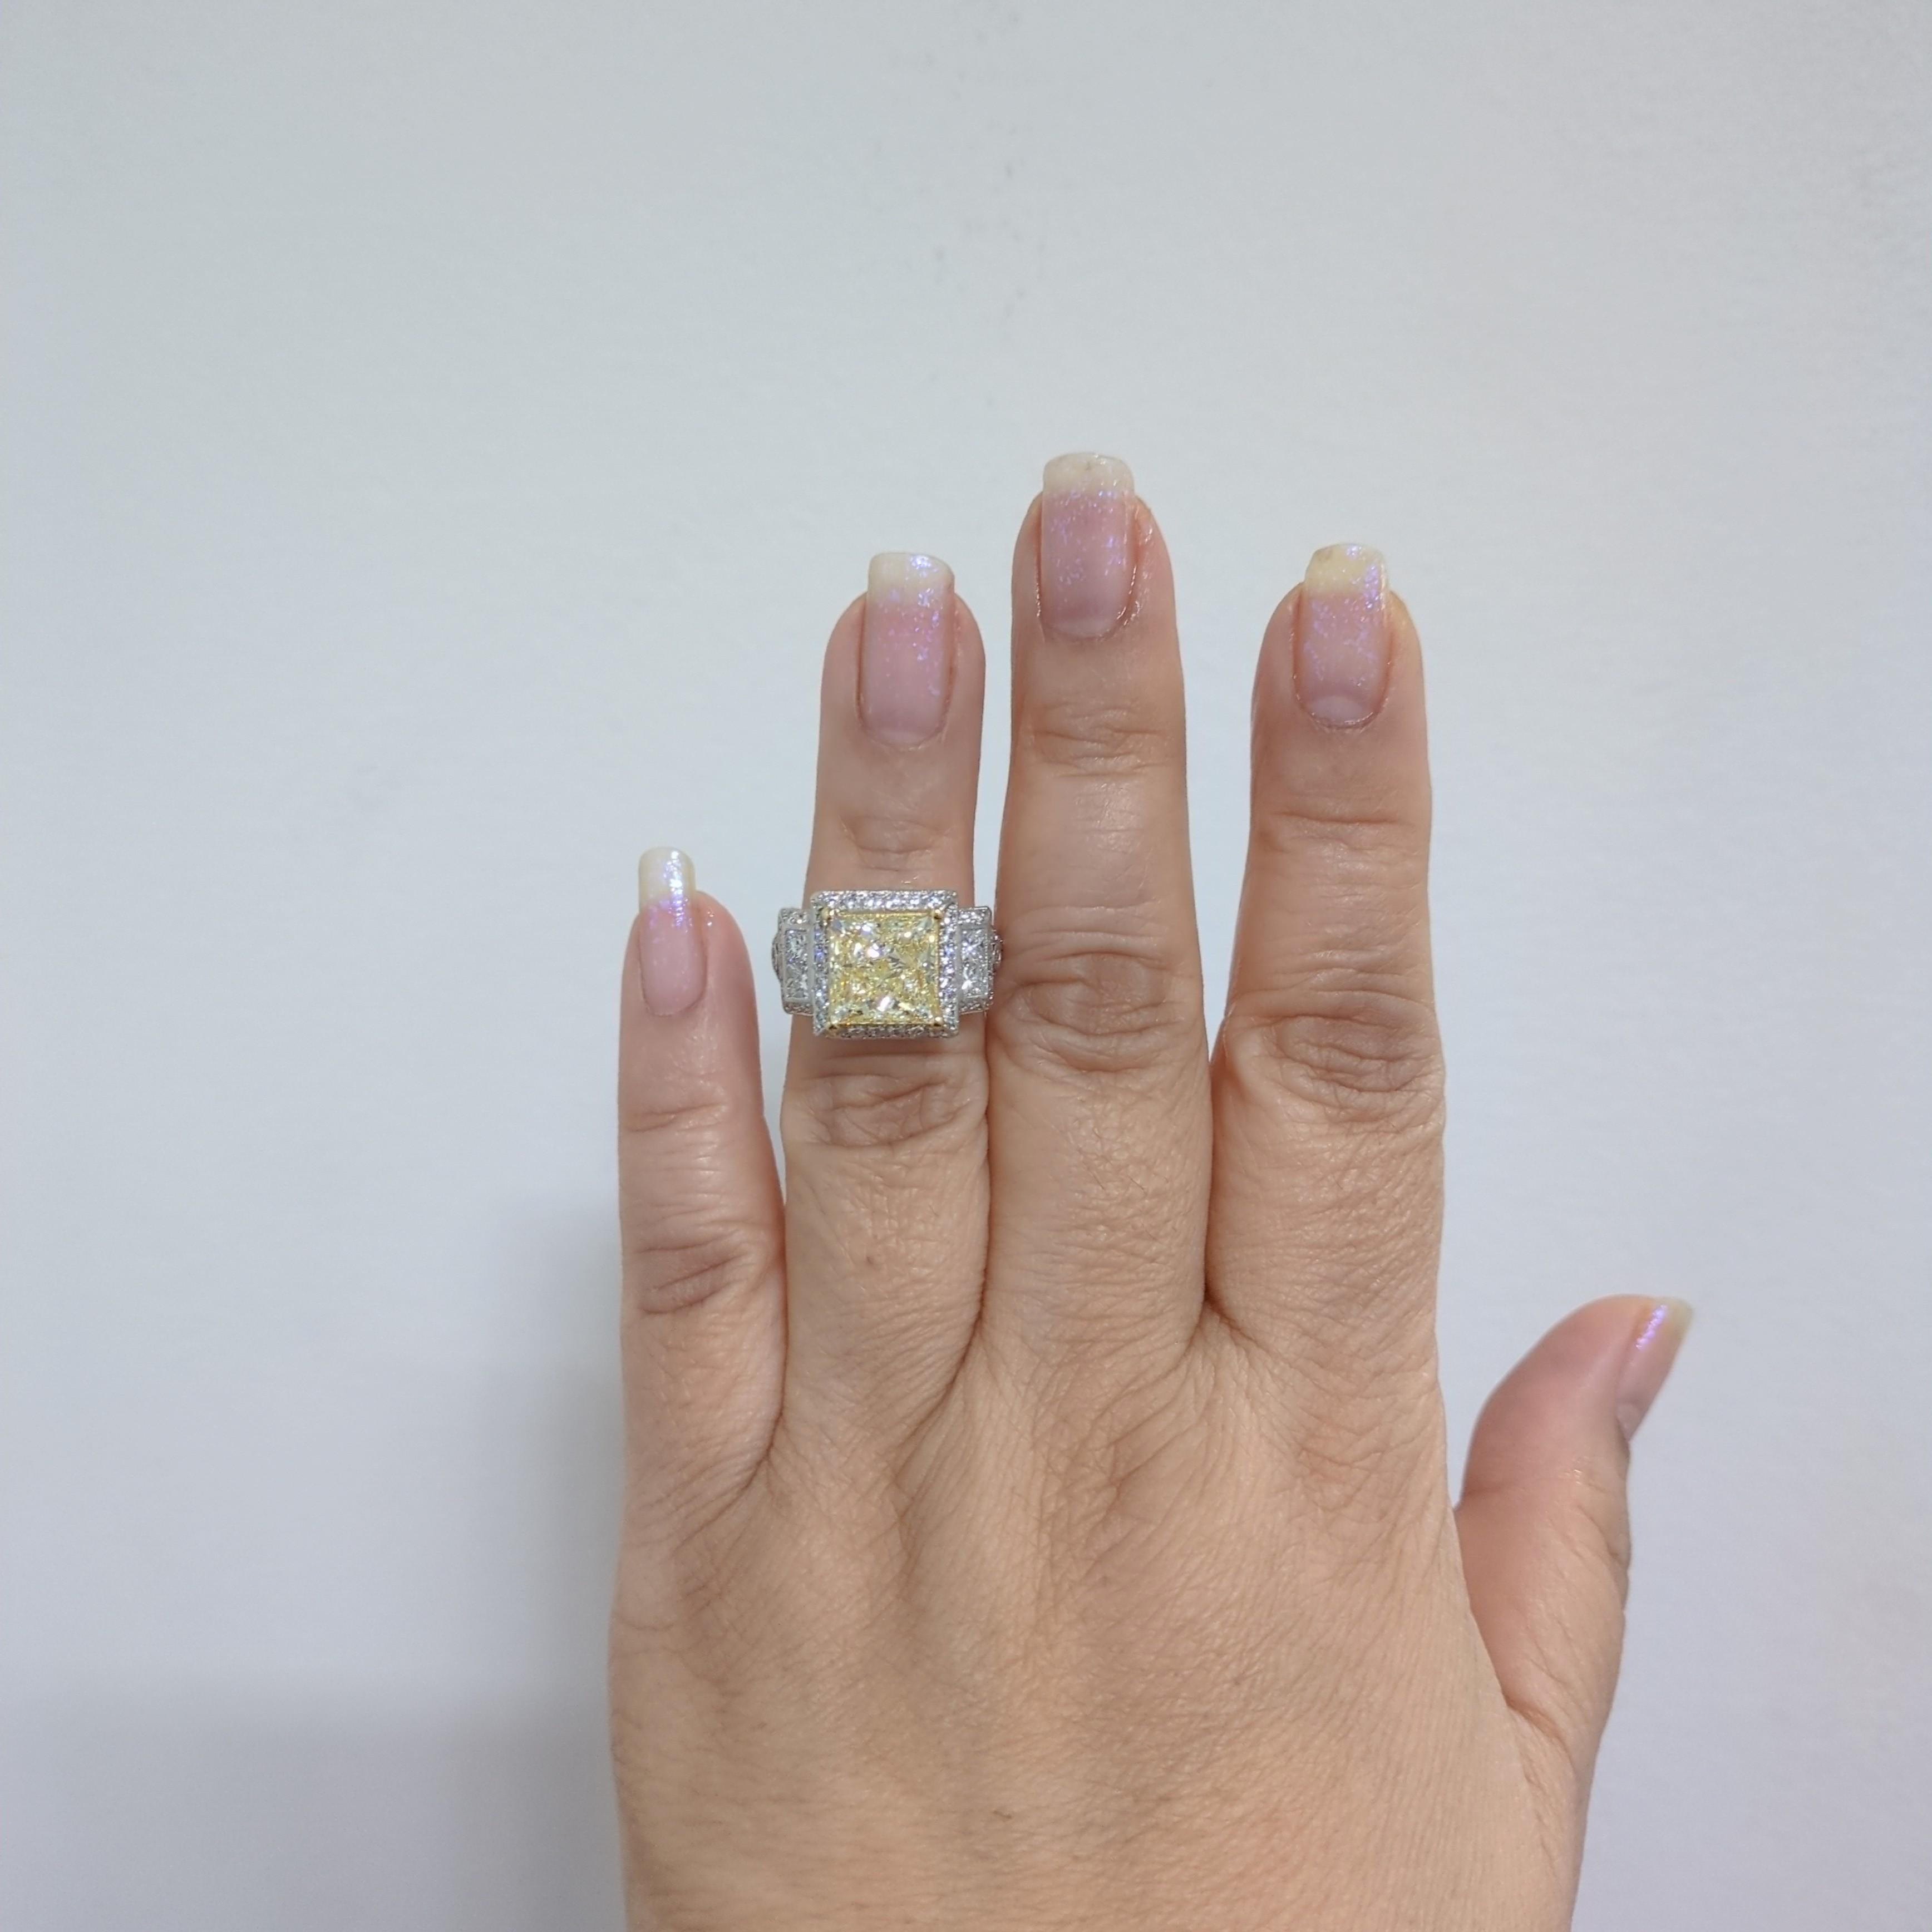 Gorgeous 5.05 ct. yellow diamond princess cut with good quality white diamond rounds and squares.  Handmade in 14k white and yellow gold.  Ring size 6.5+.